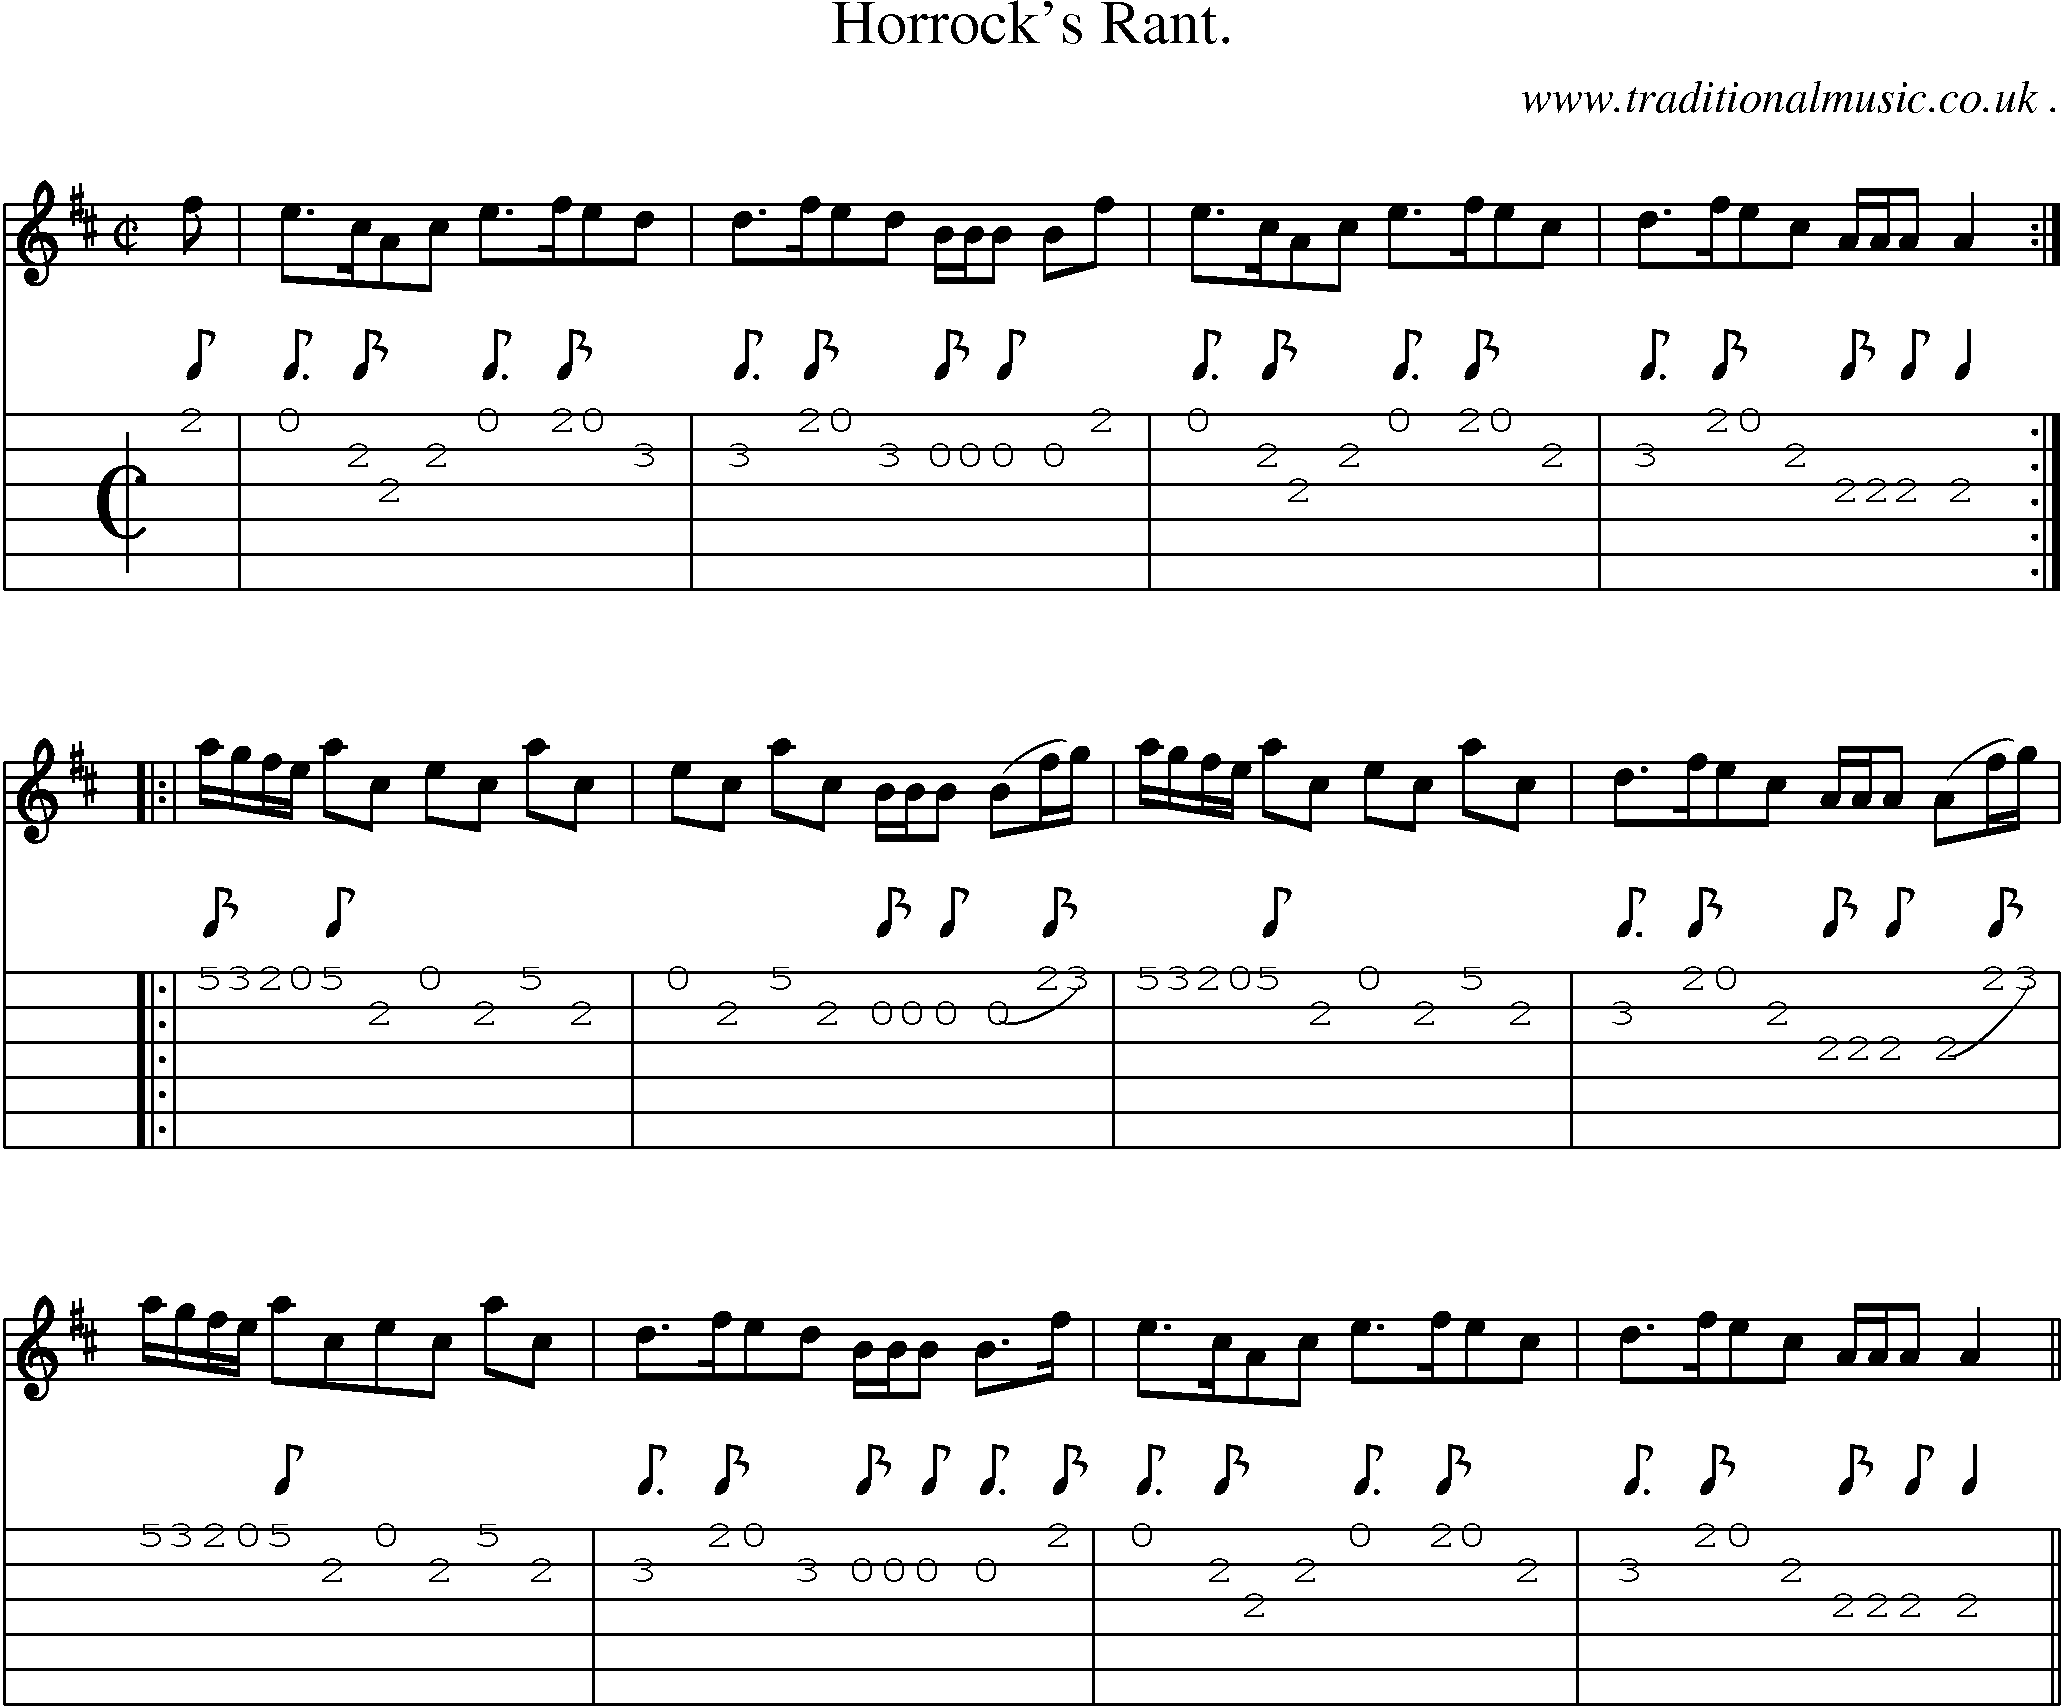 Sheet-Music and Guitar Tabs for Horrocks Rant